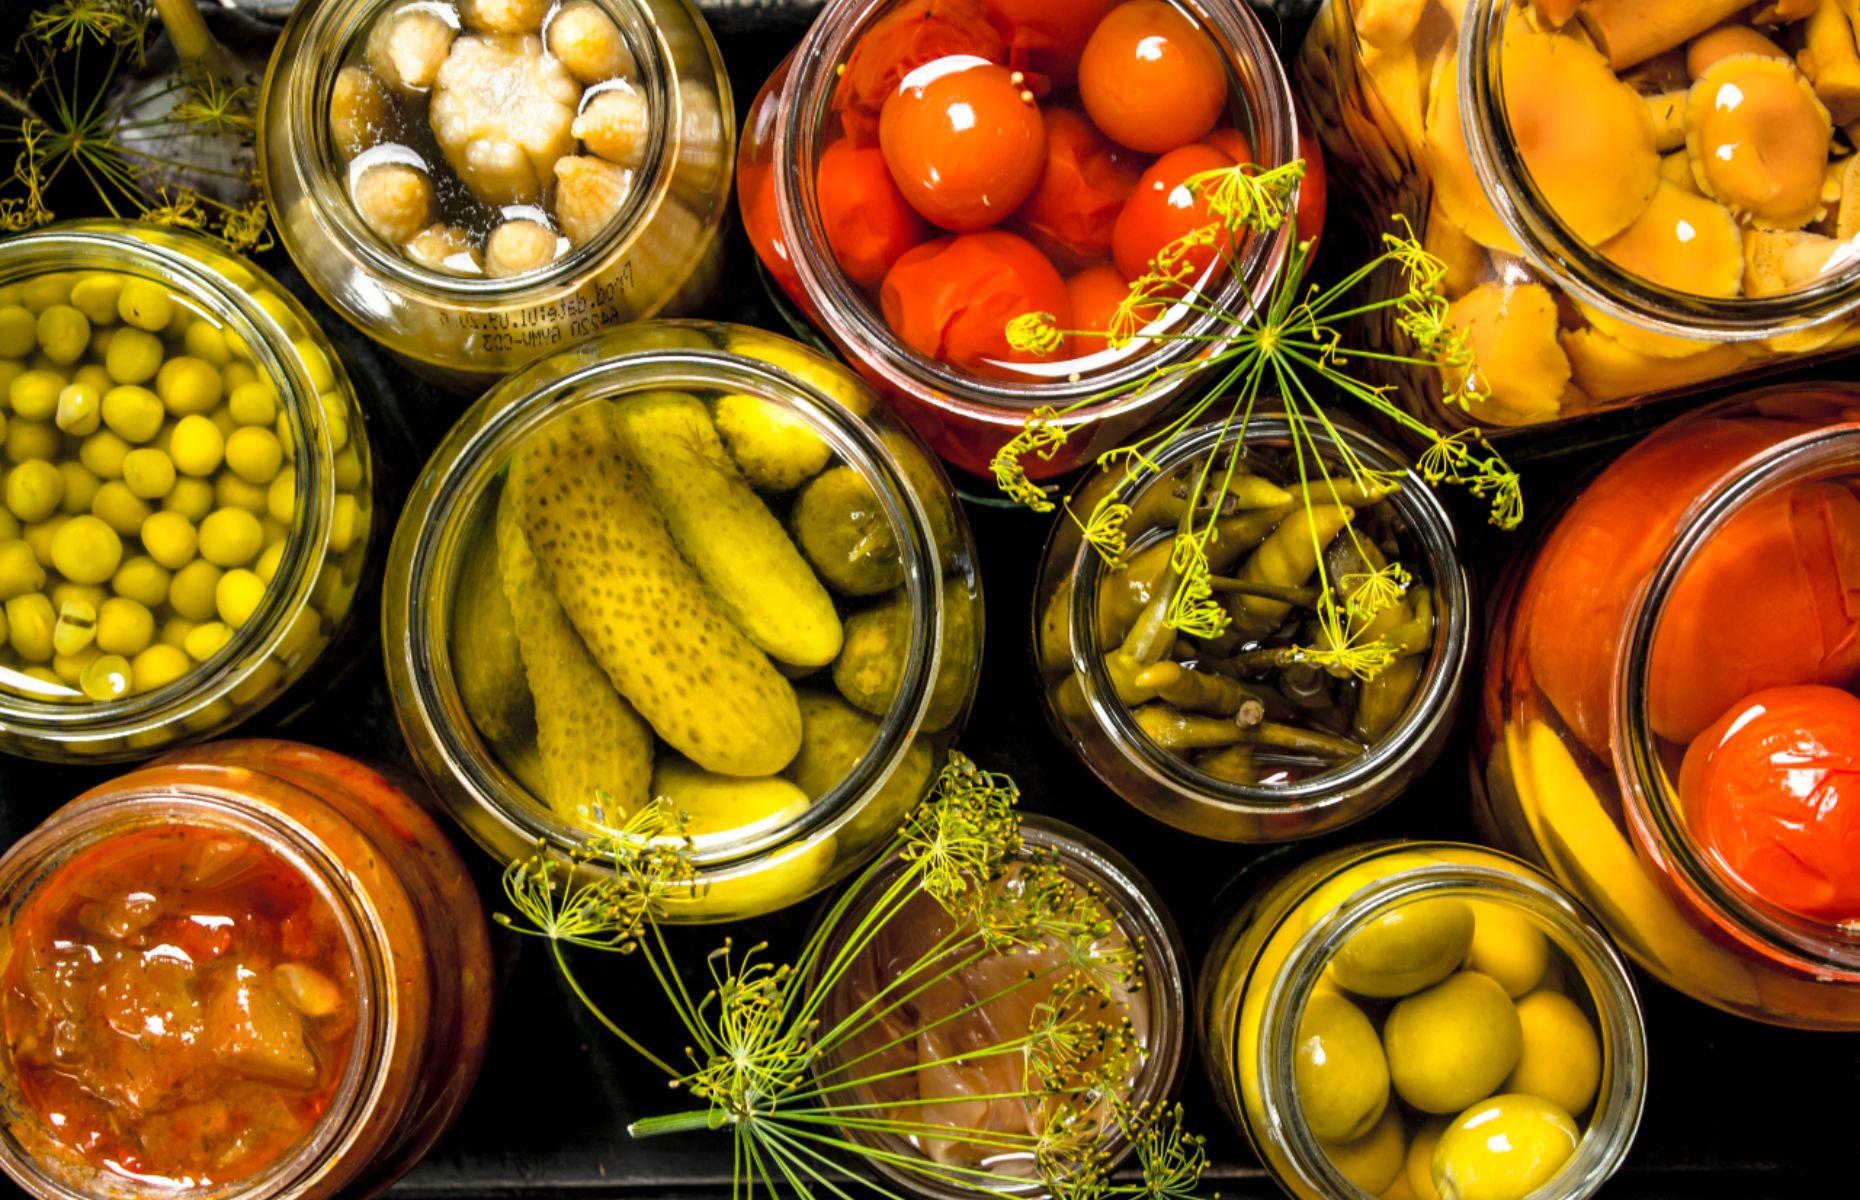 Pickles (Image: Chatham172/Shutterstock )